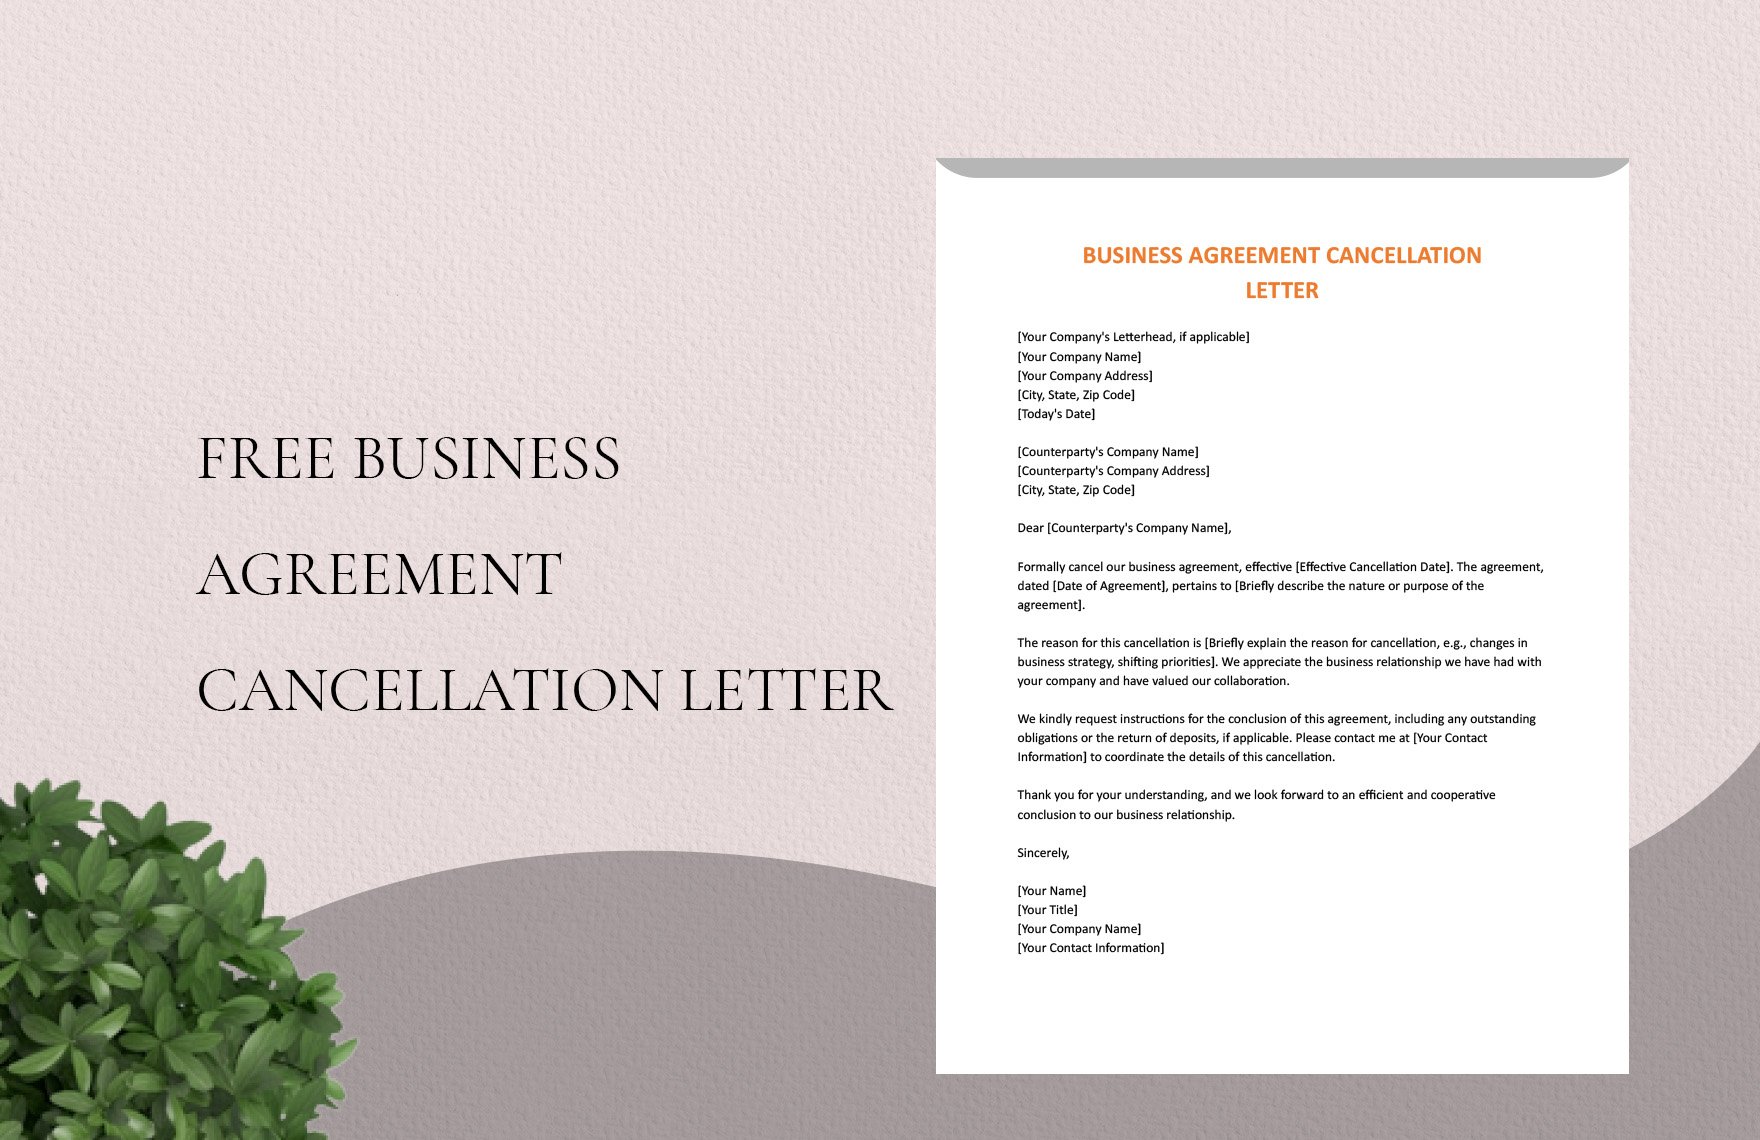 Business Agreement Cancellation Letter